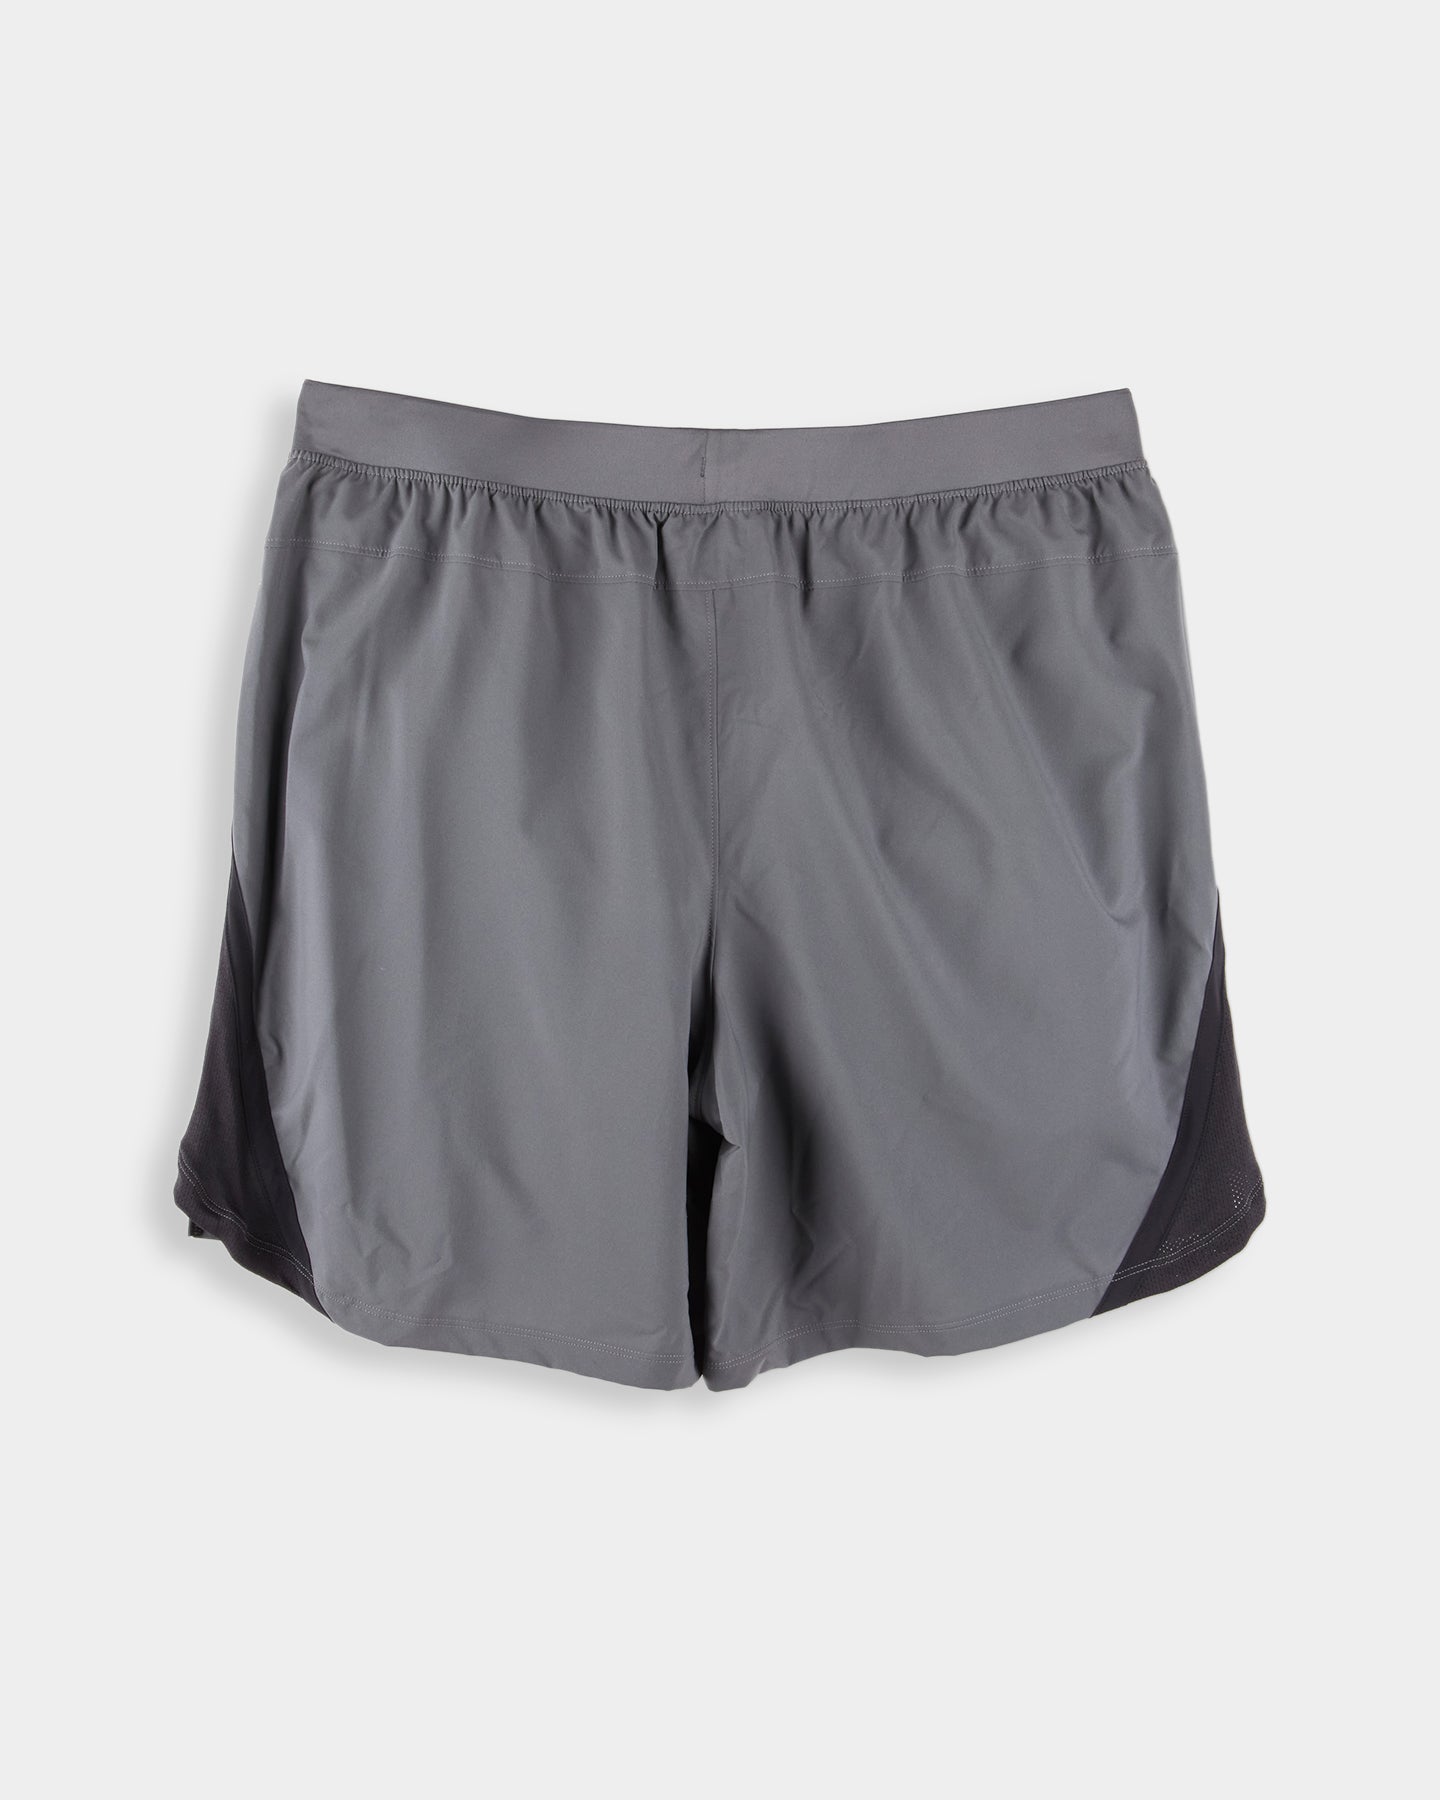 Under Armour Launch 7" 2in1 Short, Pitch Gray, L A2